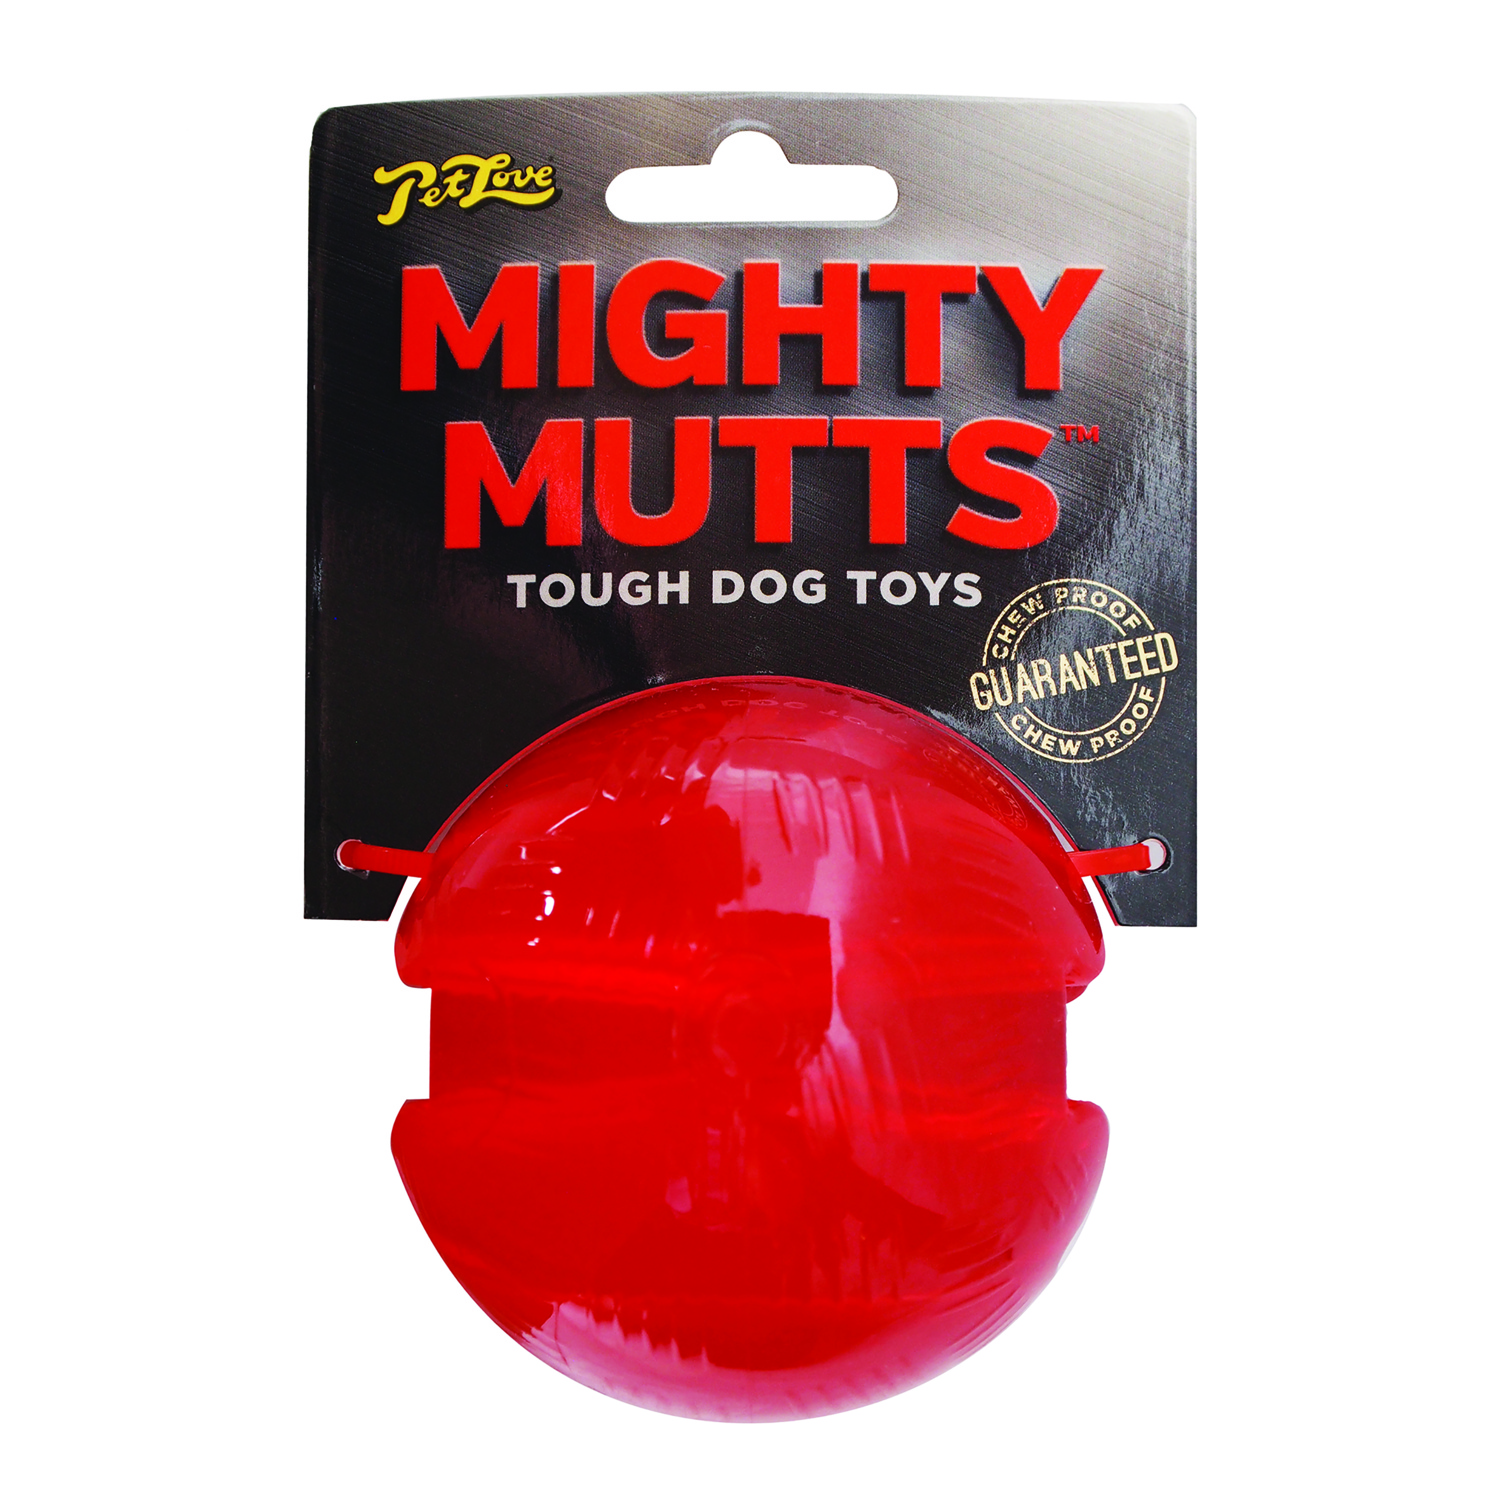 Pet Love Mighty Mutts Medium Rubber Ball Dog Toy Image